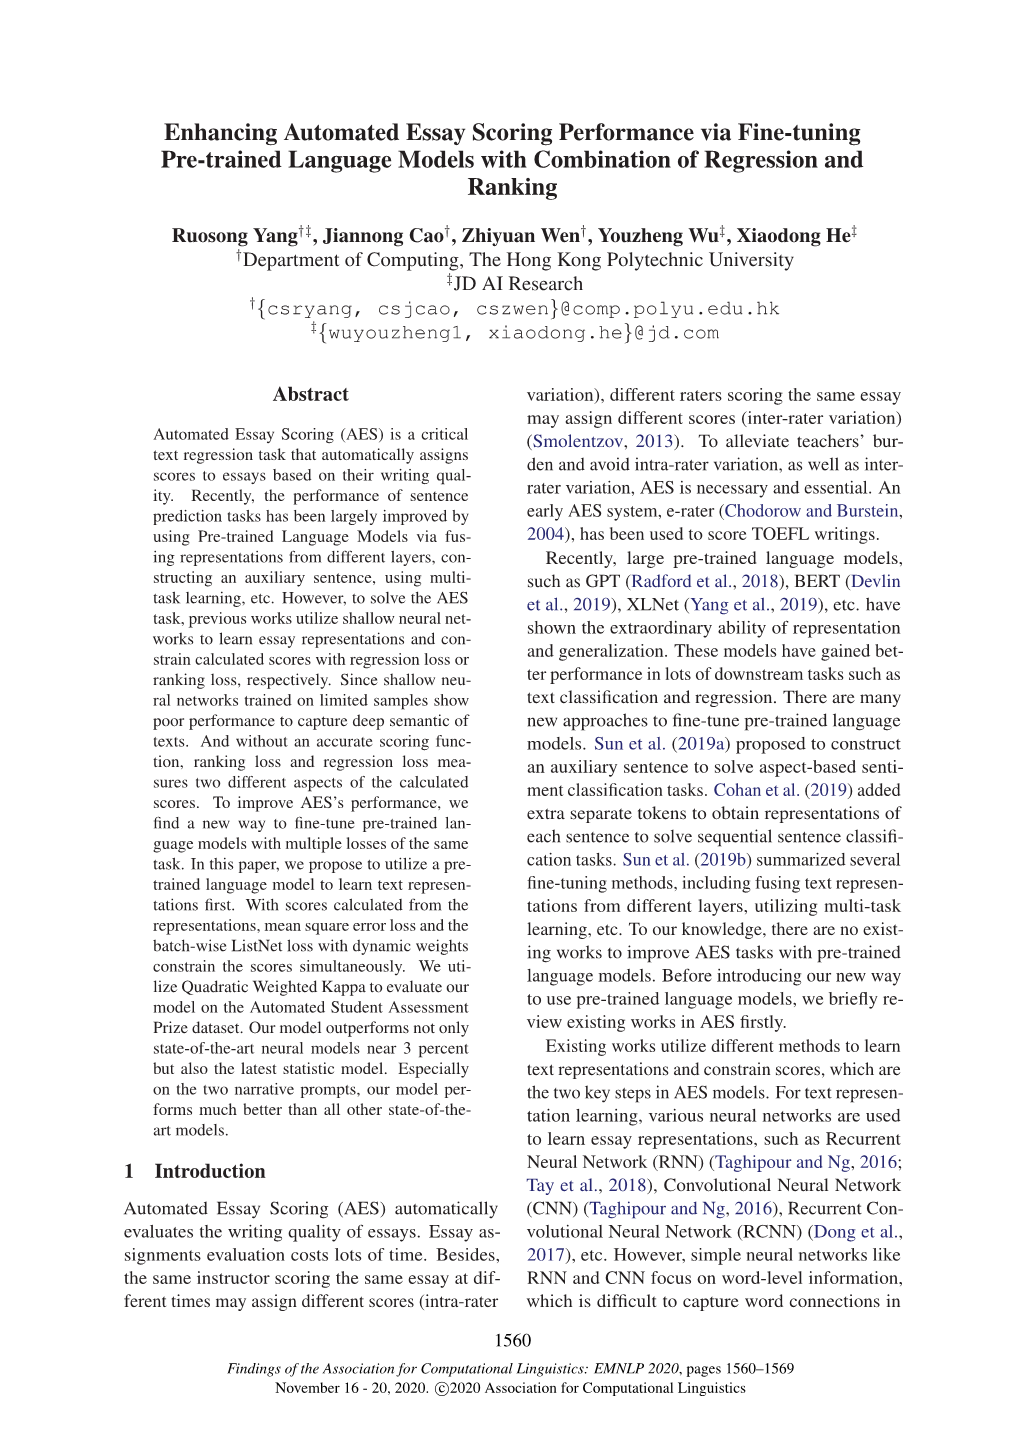 Enhancing Automated Essay Scoring Performance Via Fine-Tuning Pre-Trained Language Models with Combination of Regression and Ranking